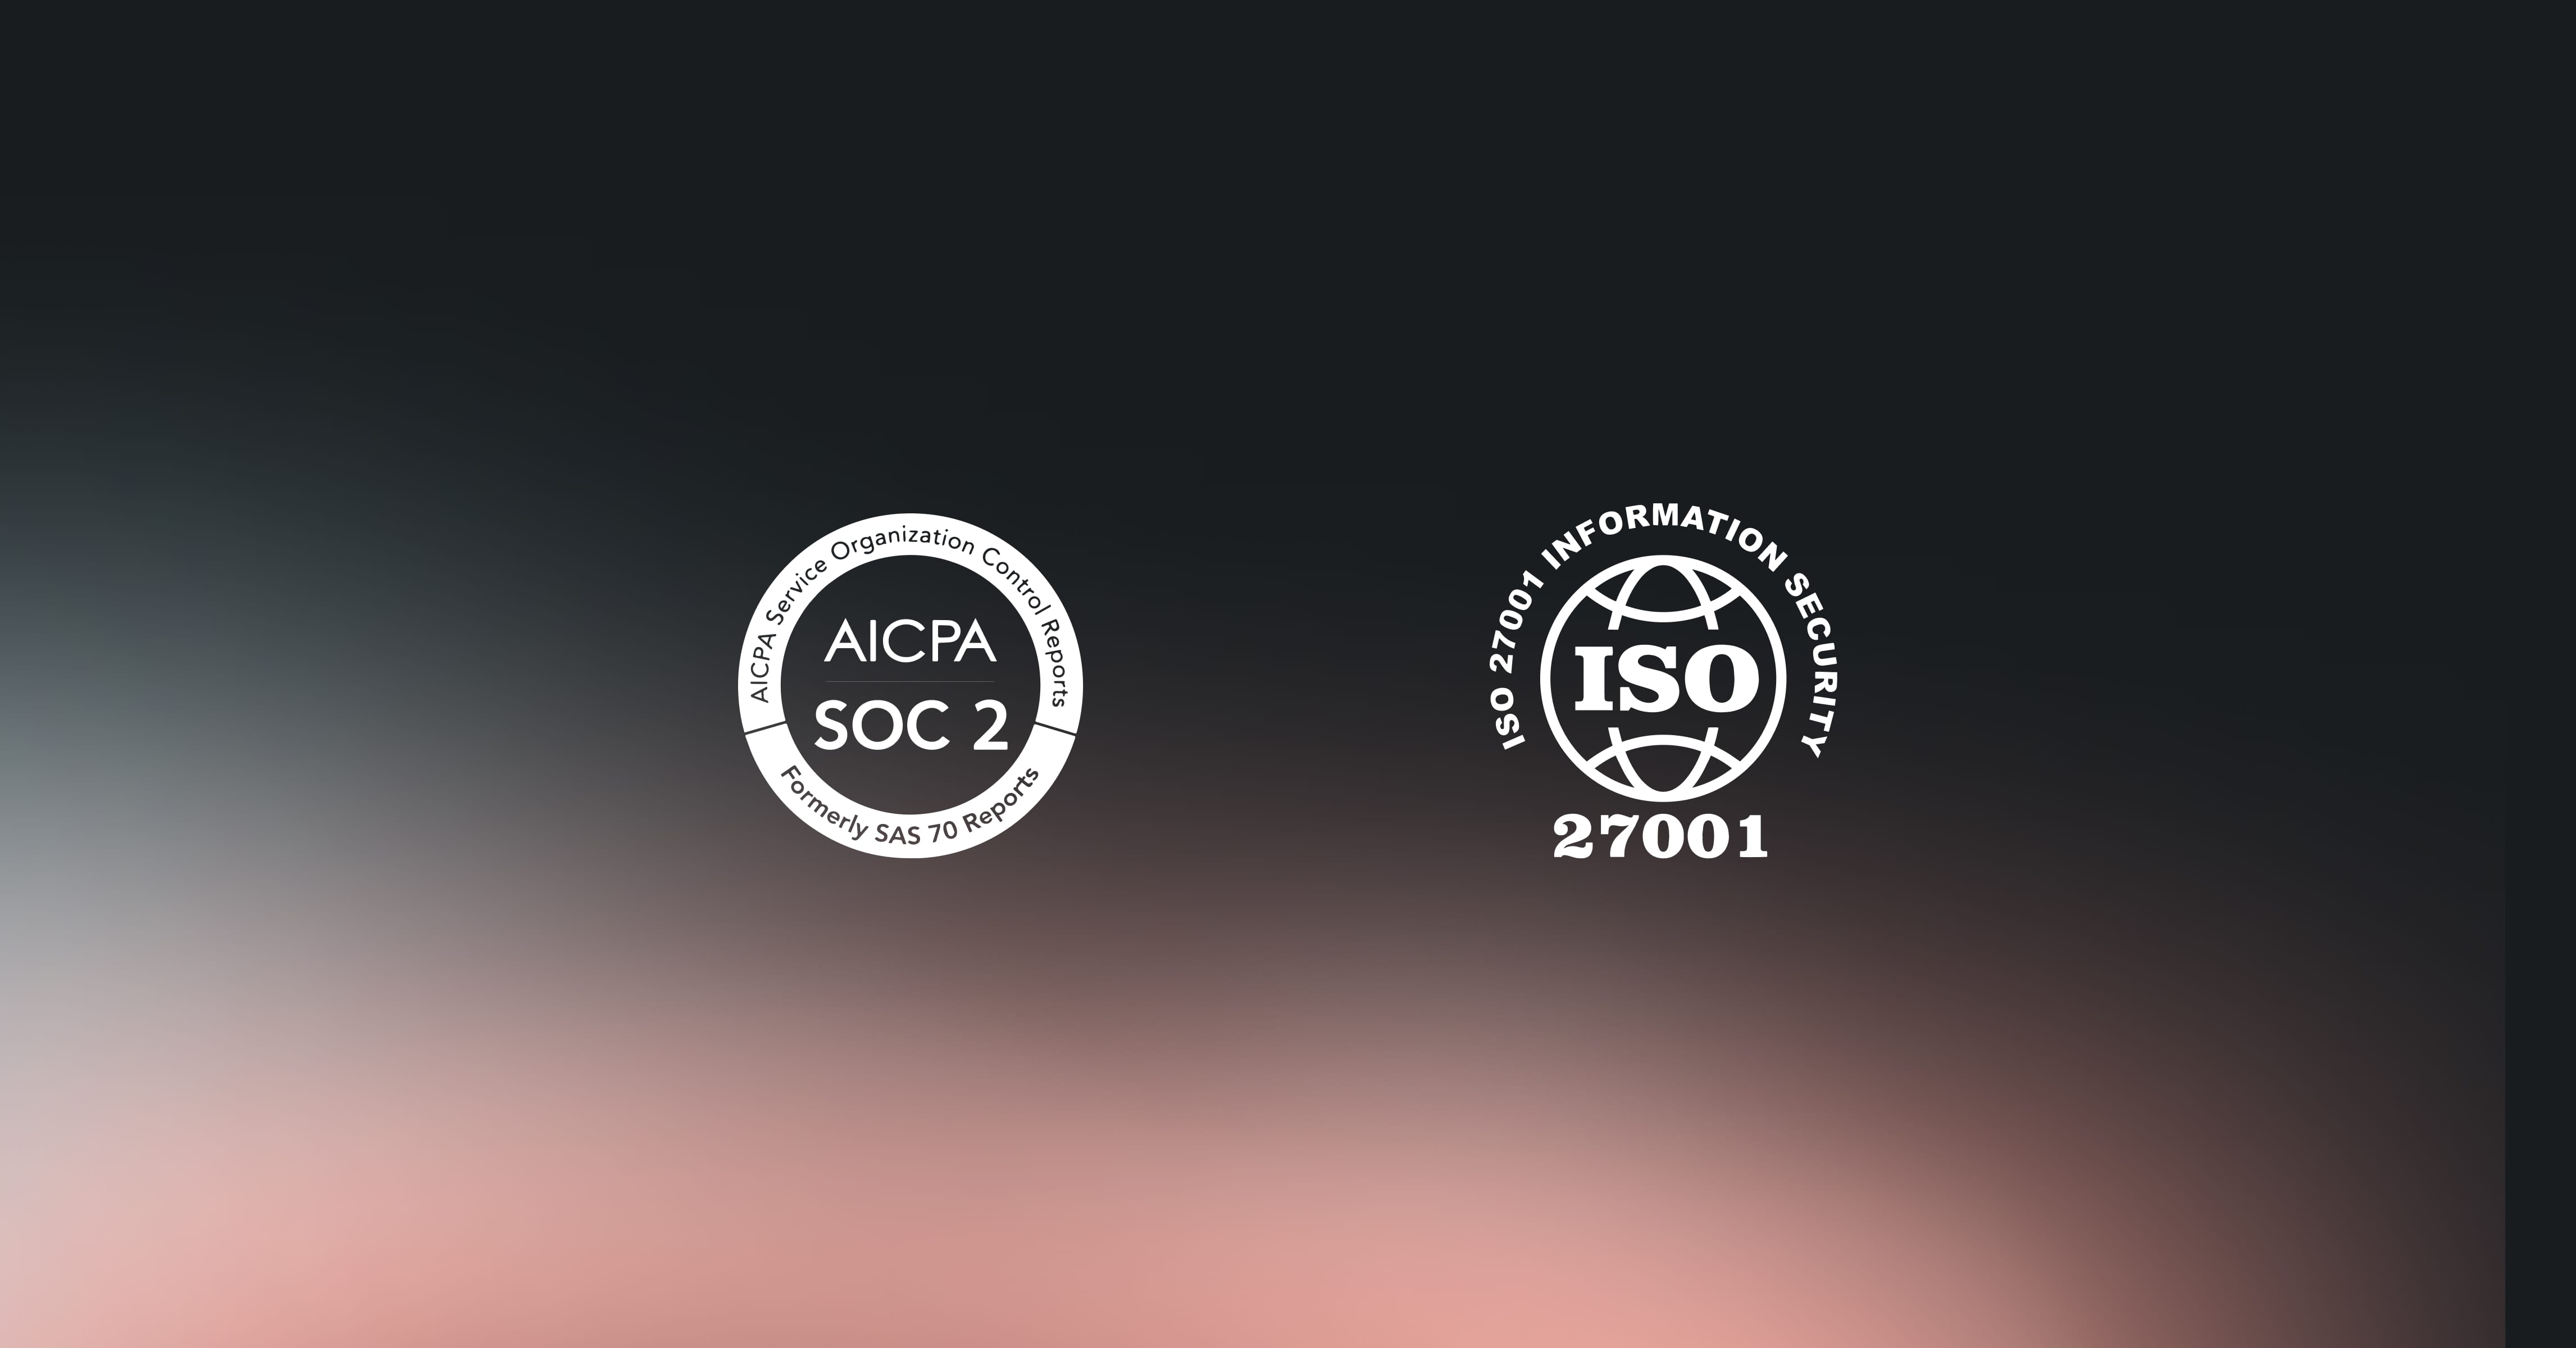 The SOC 2 and ISO 27001 logos on a blue background with light blue grid lines